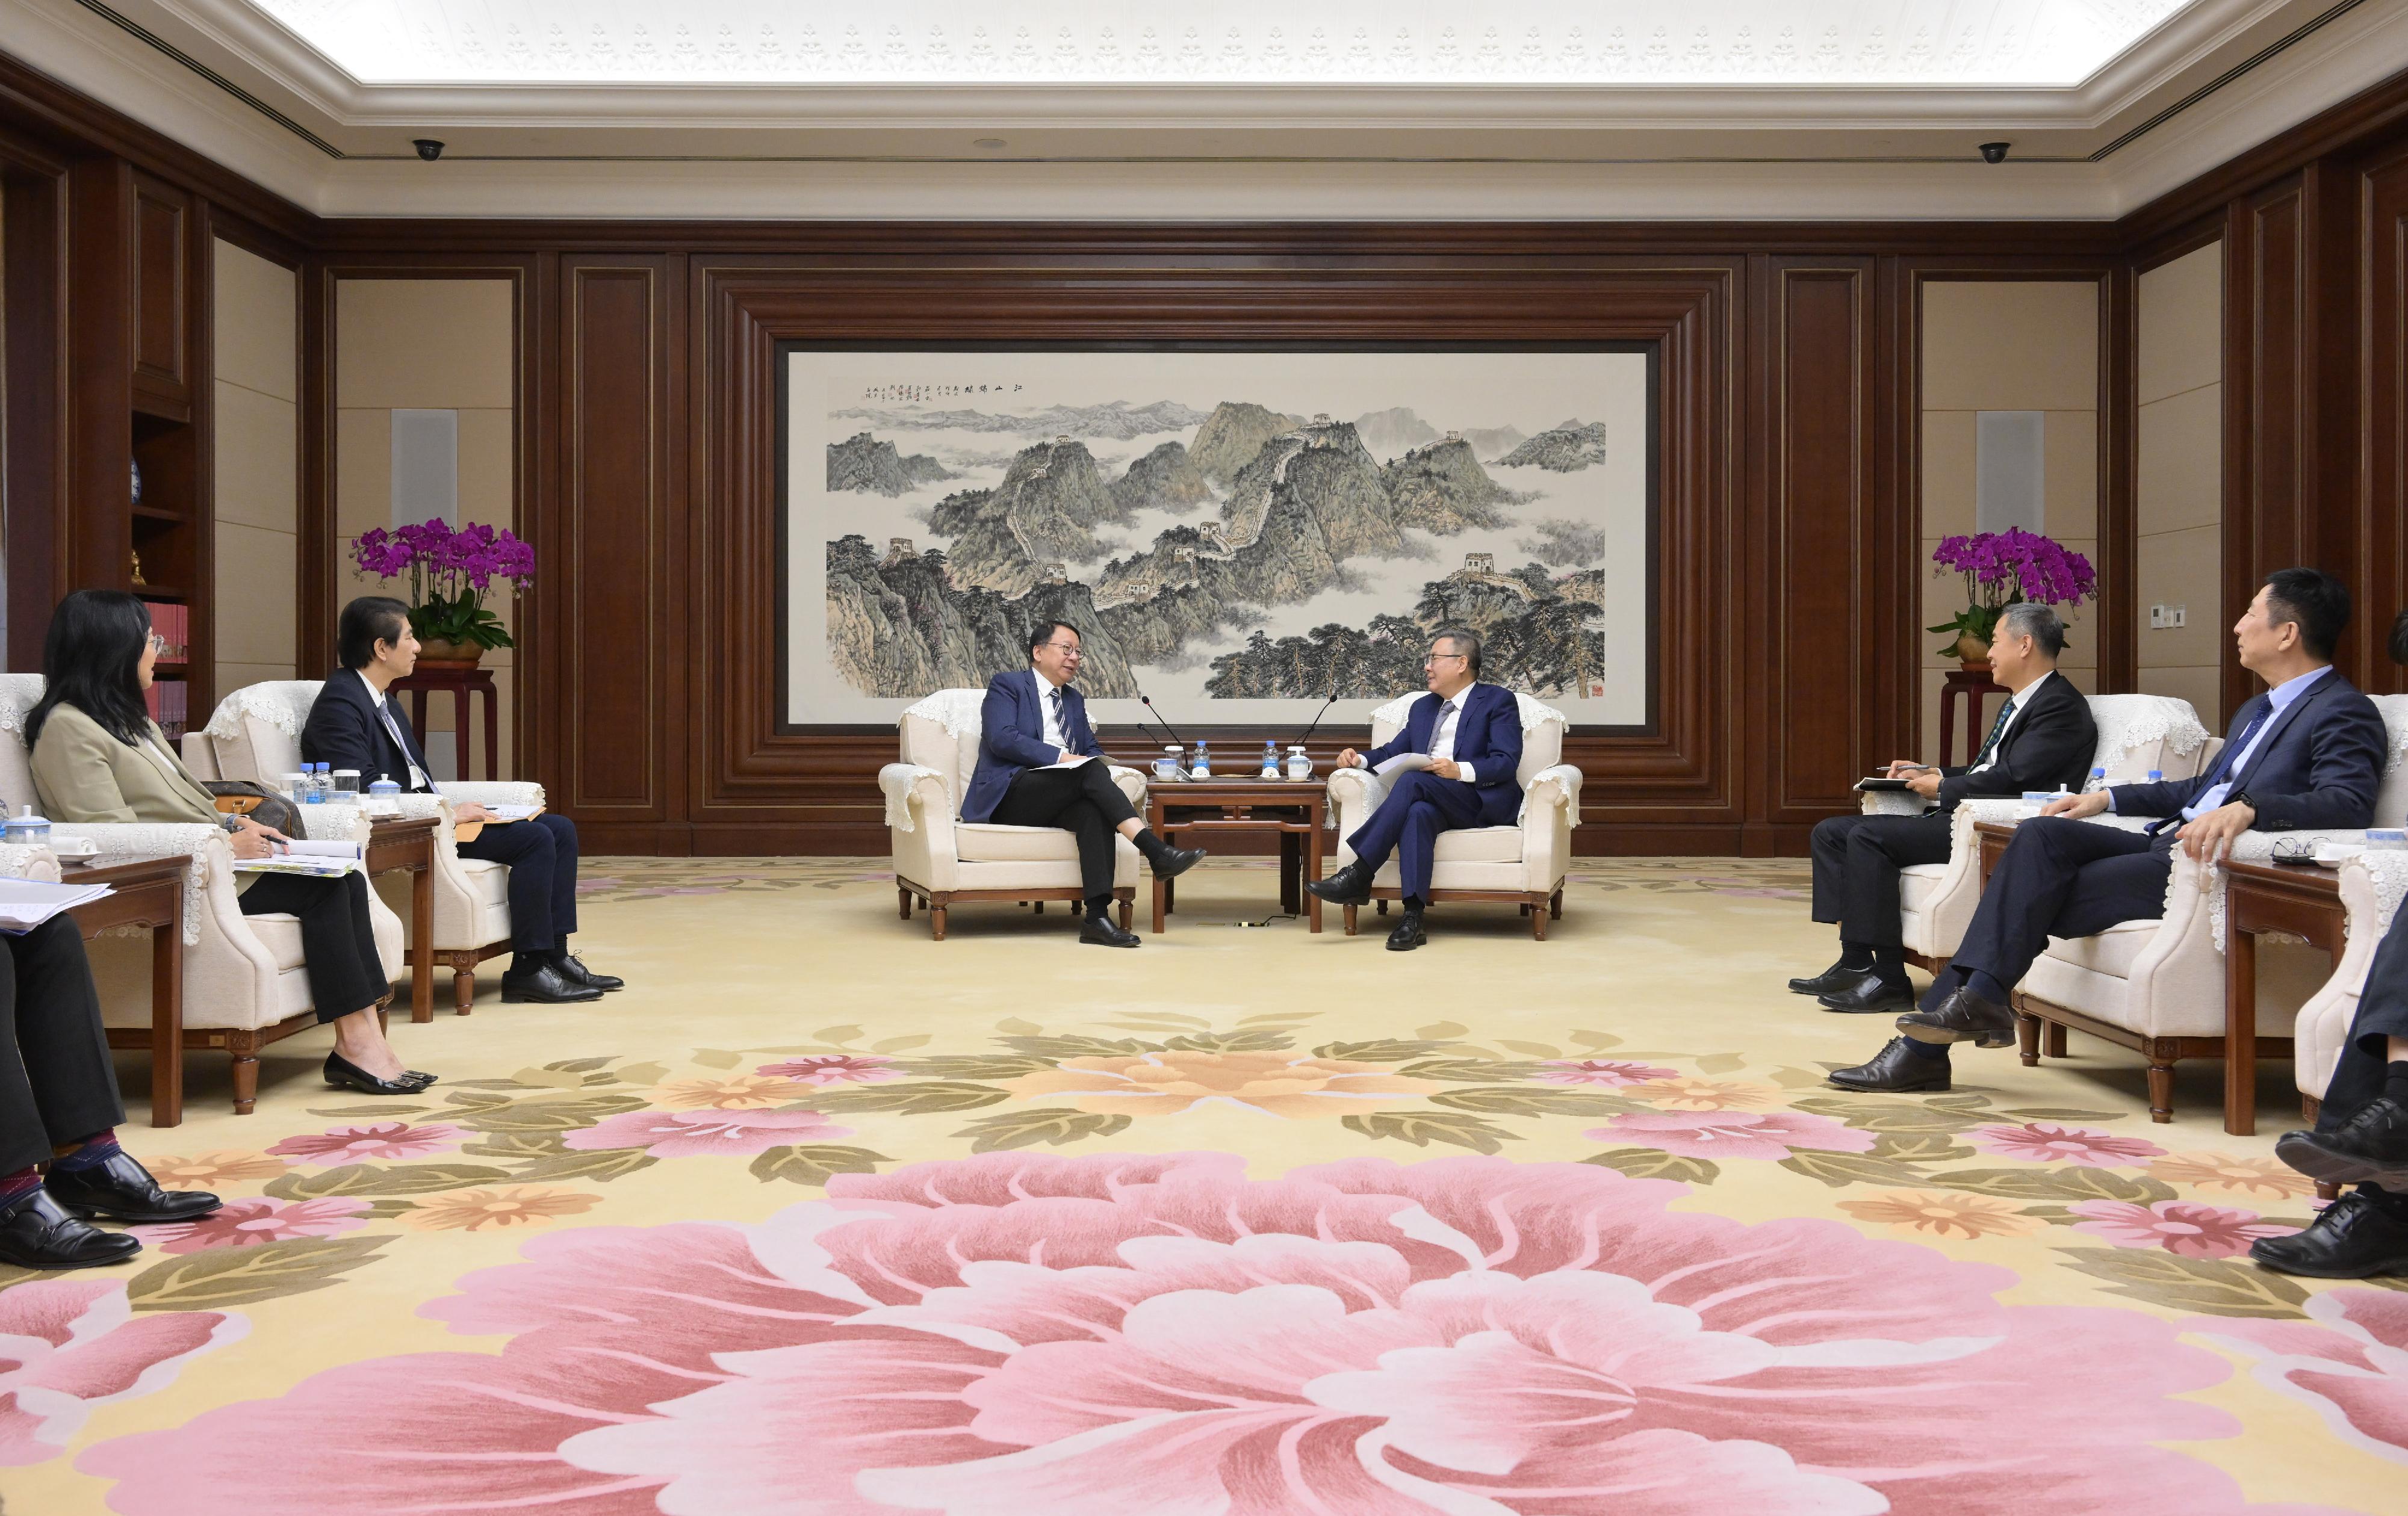 The Chief Secretary for Administration, Mr Chan Kwok-ki (third left), meets with Vice Mayor of the People's Government of Beijing Municipality Mr Liu Yuhui (third right) in Beijing today (April 27). Also attending the meeting is the Director of the Office of the Government of the Hong Kong Special Administrative Region in Beijing, Mr Rex Chang (second left). 